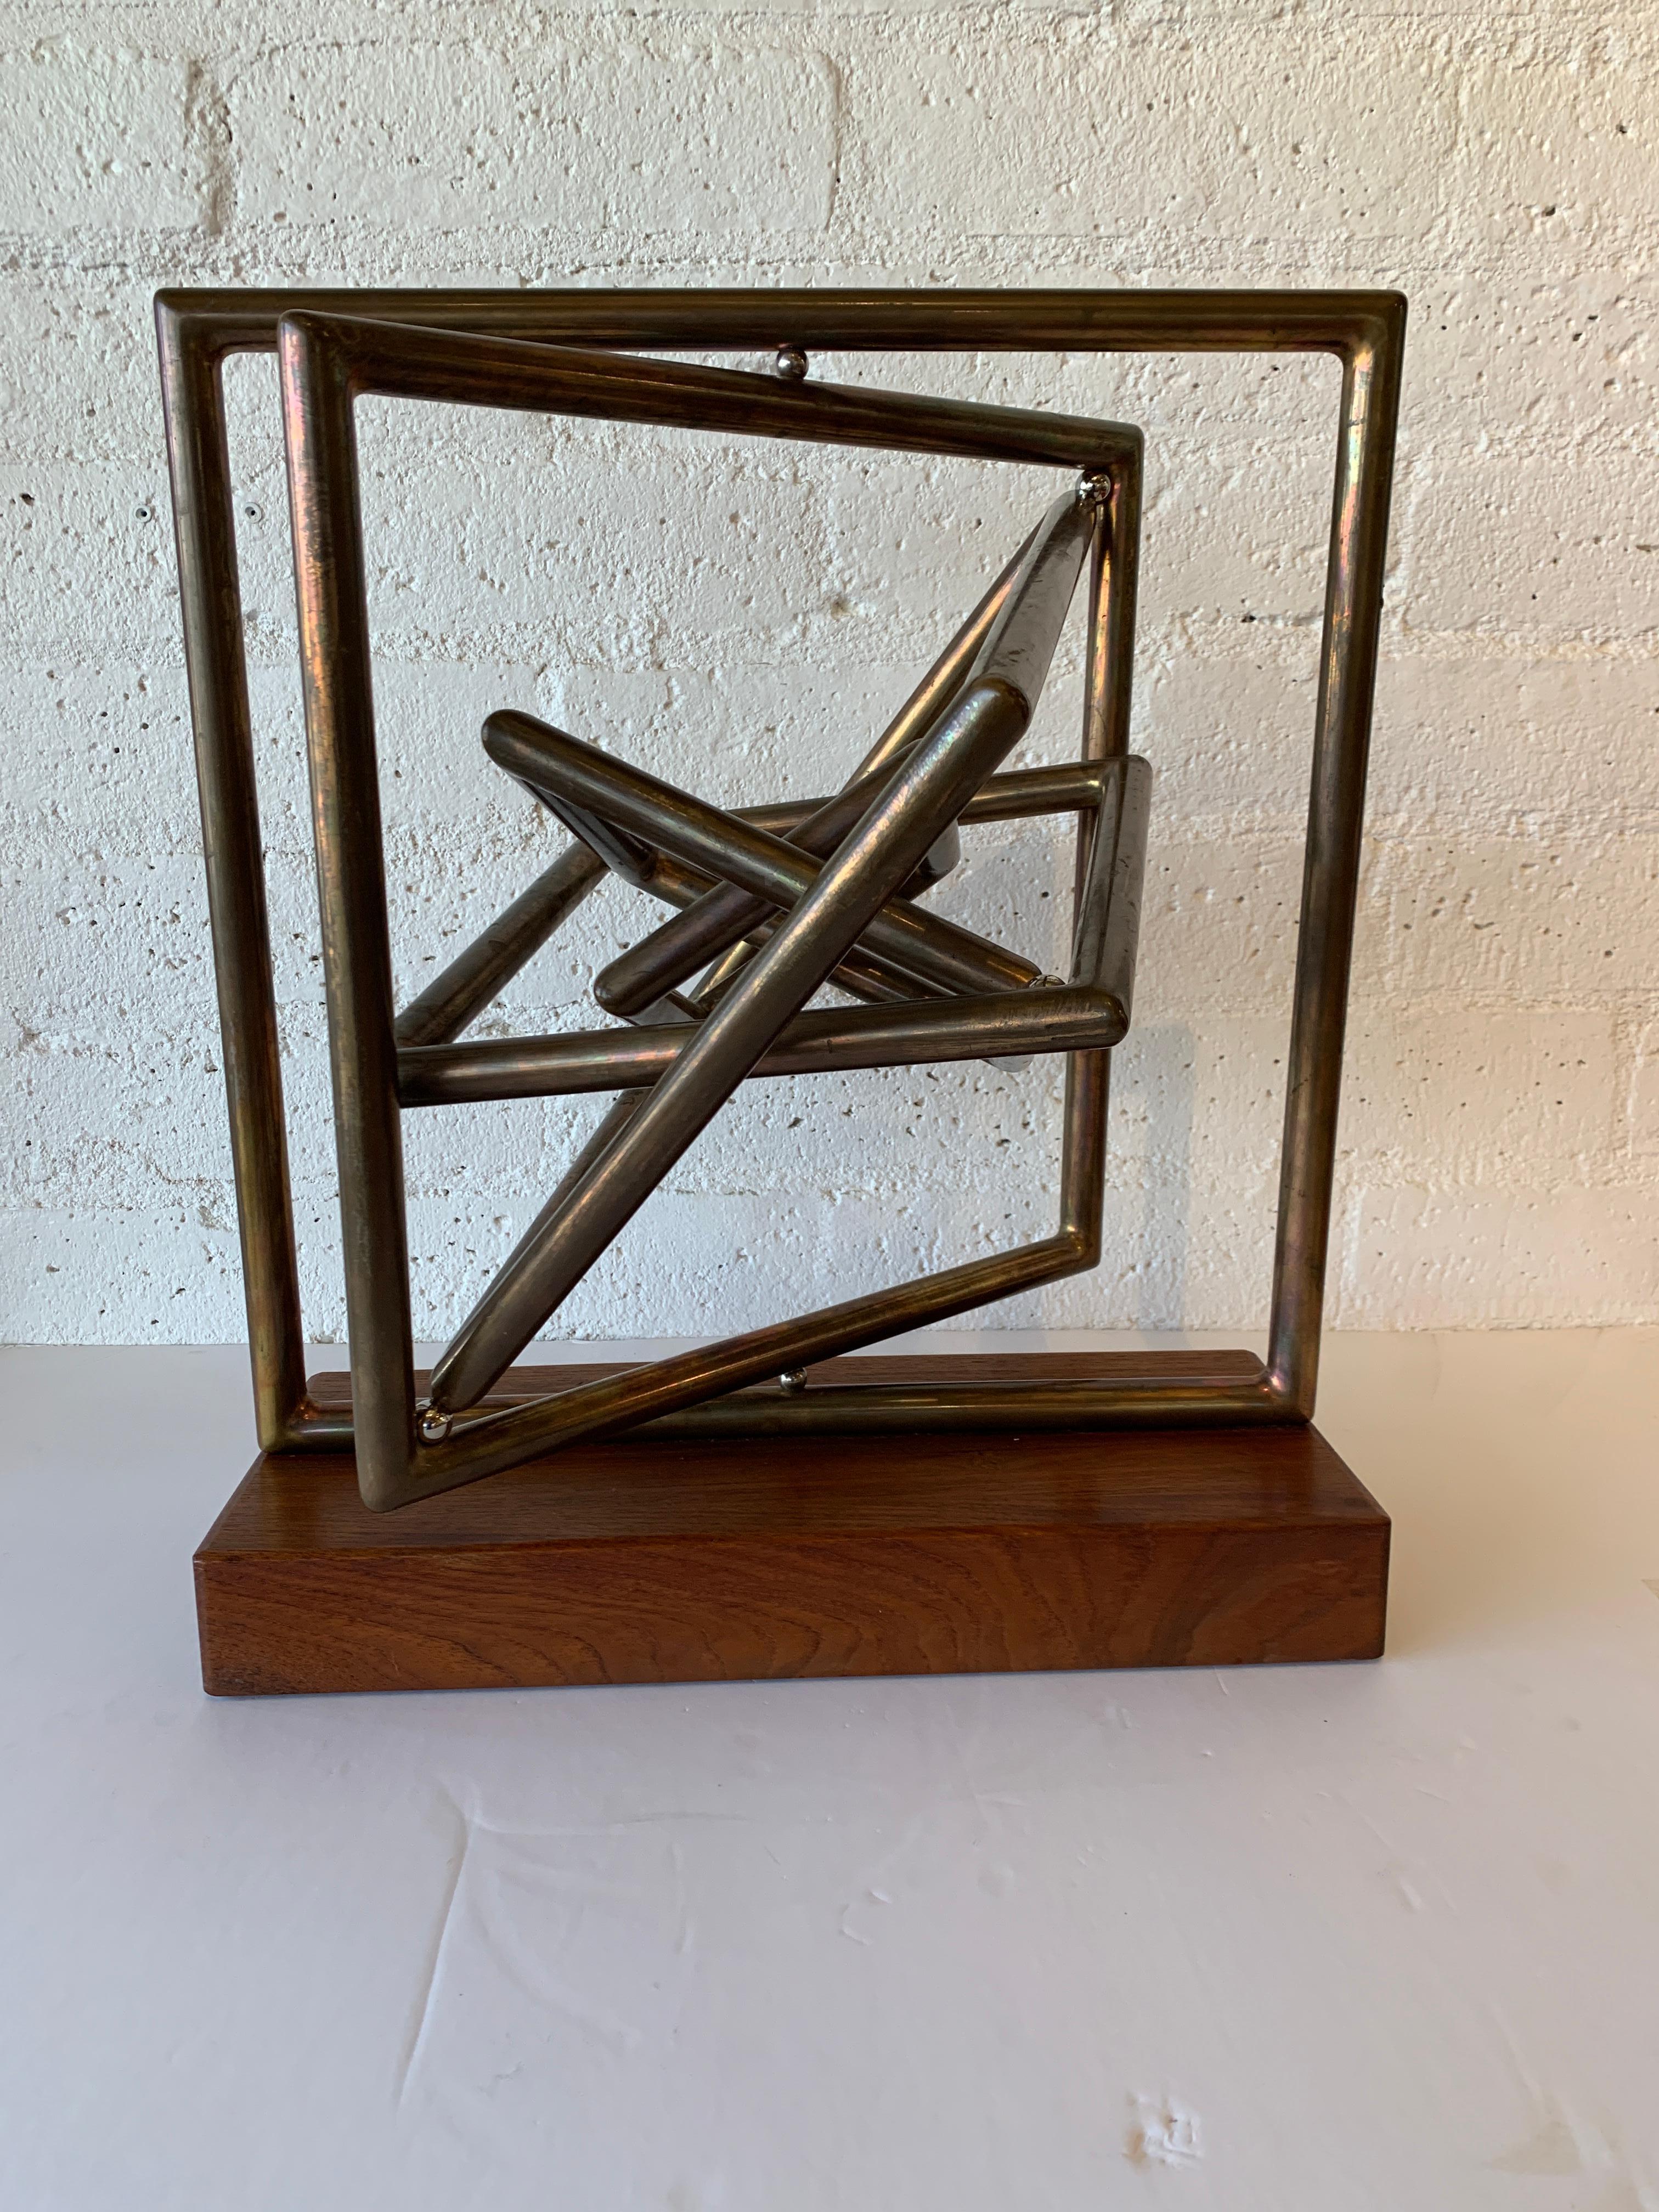 A wonderful large kinetic sculpture by the noted artist Dennis Stewart. Crafted out of copper and steel on a wood base. Lovely patina. Signed on on arm. Overall good age appropriate condition with wear and tarnish to copper and marks to base, mostly